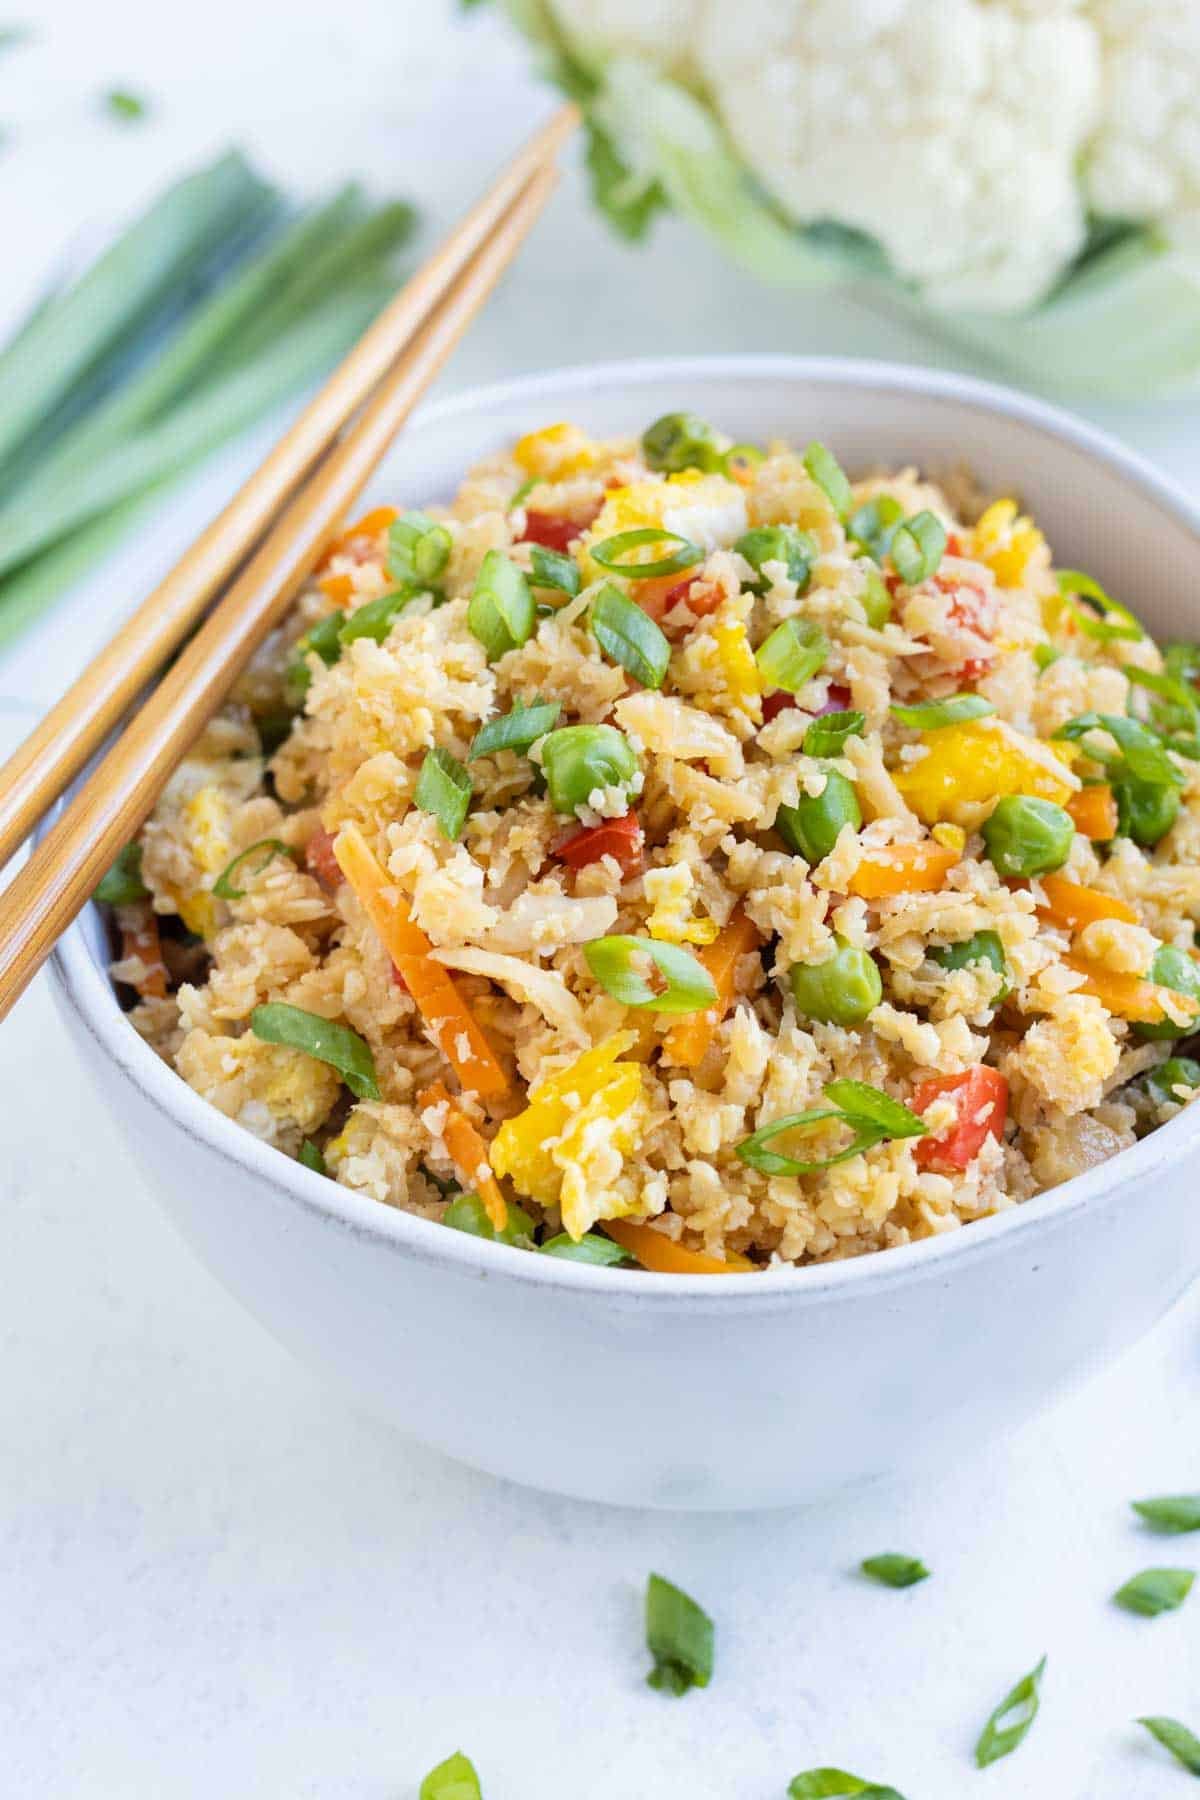 Healthy and easy cauliflower fried rice is a one-pan meal.